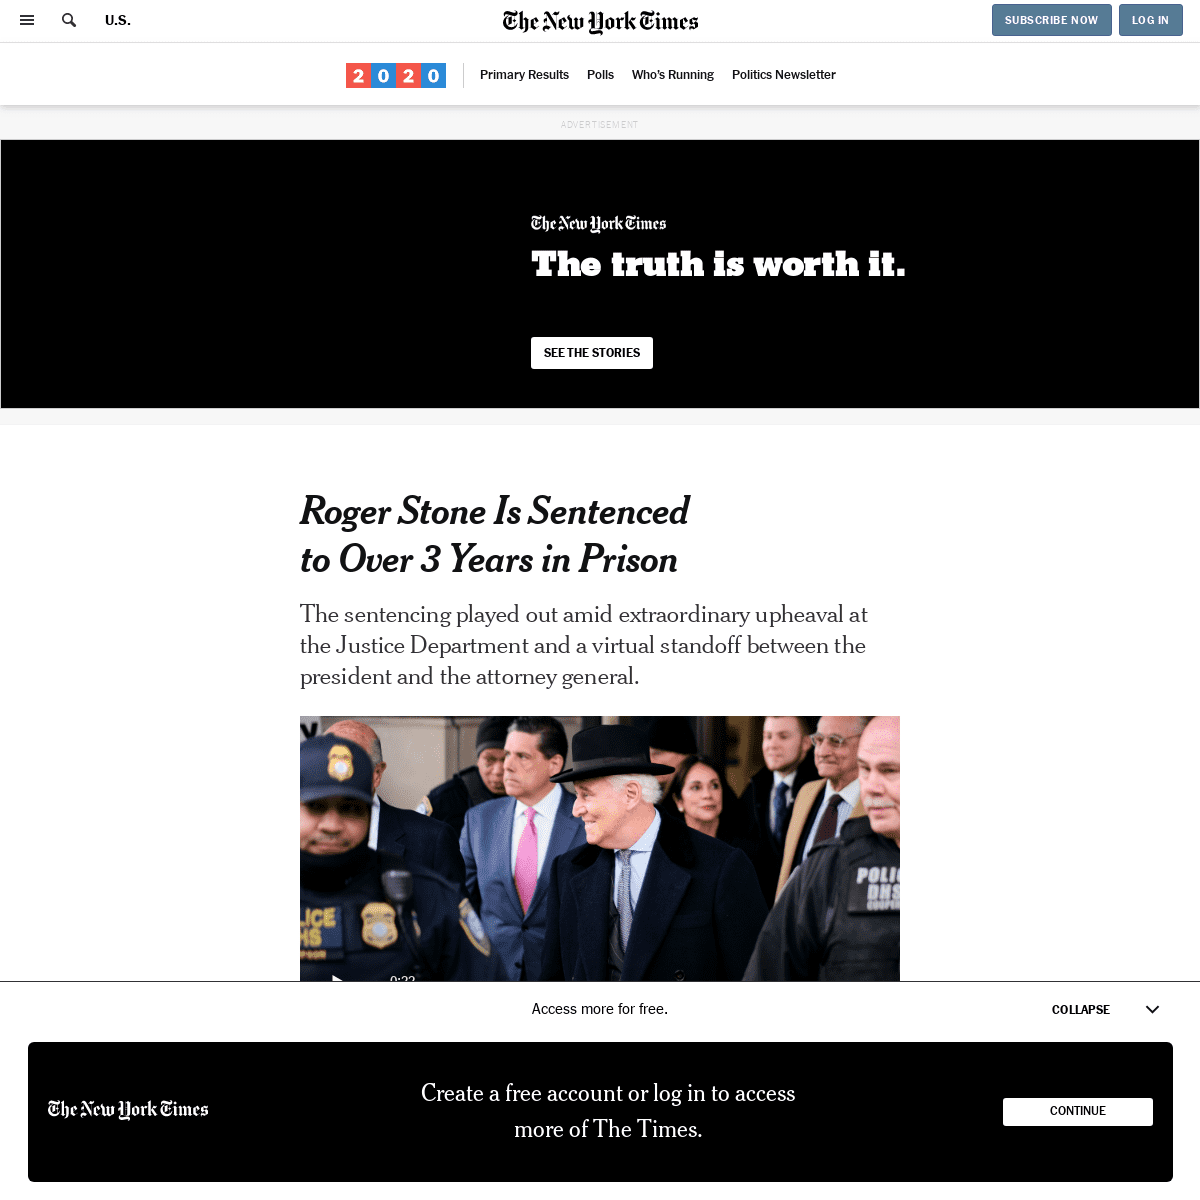 A complete backup of www.nytimes.com/2020/02/20/us/roger-stone-40-months-sentencing-verdict.html